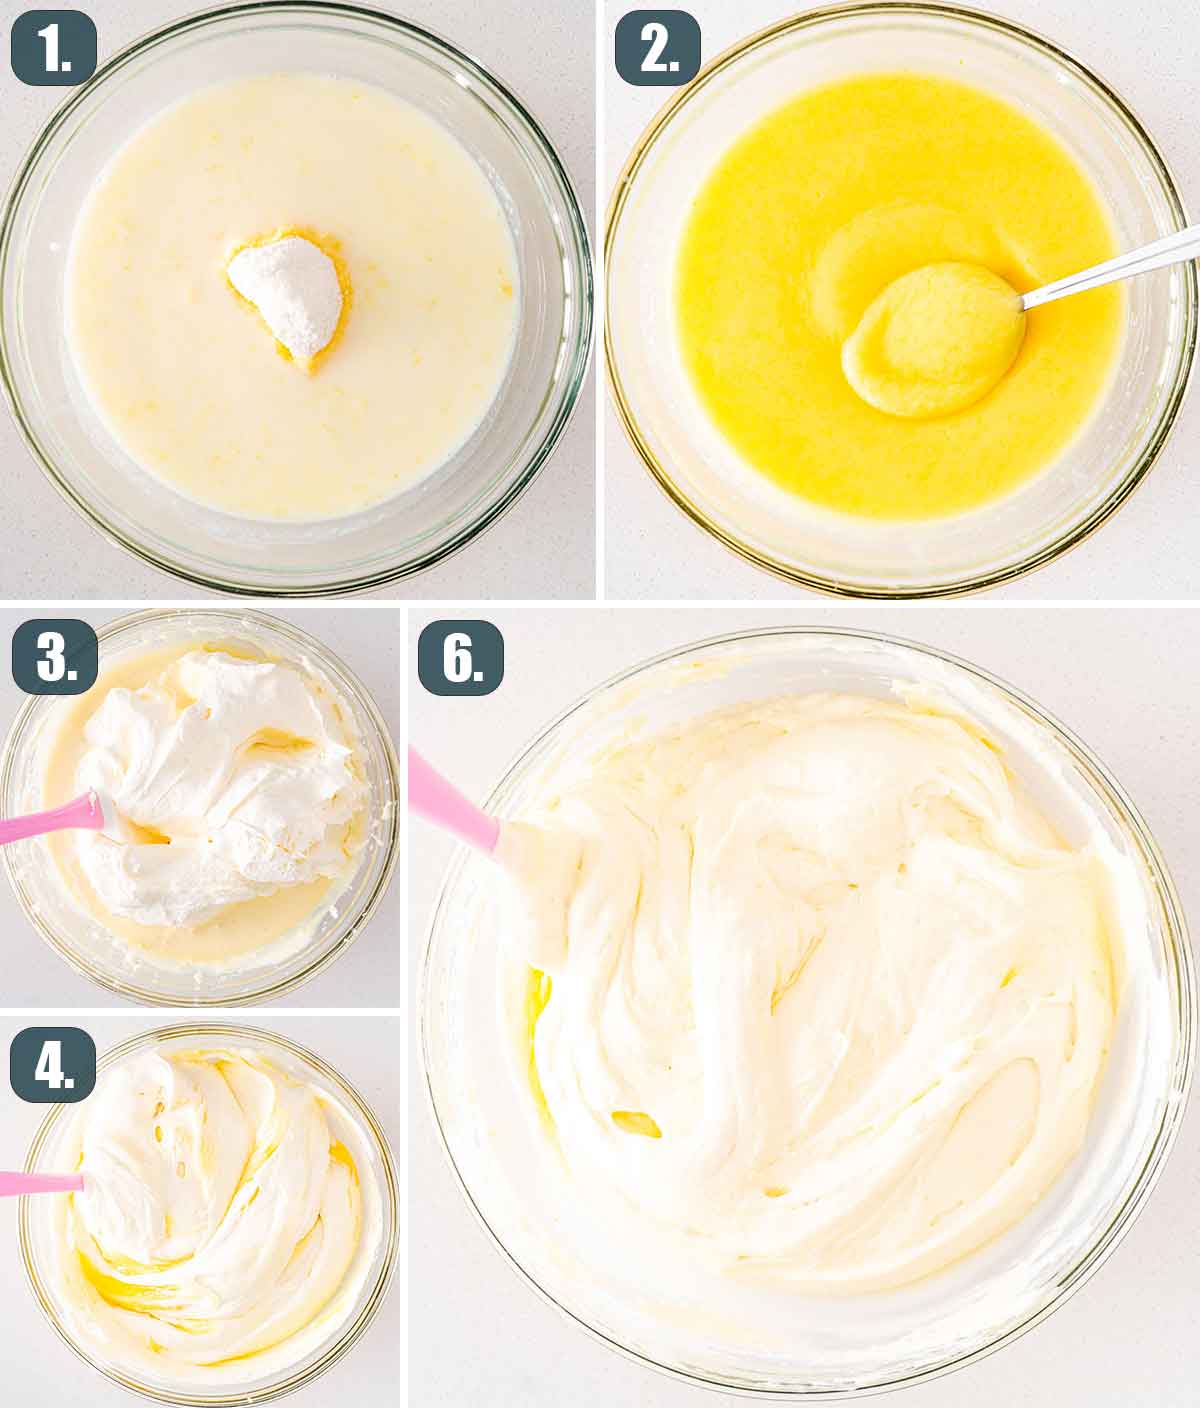 process shots showing showing how to make filling for banana pudding.